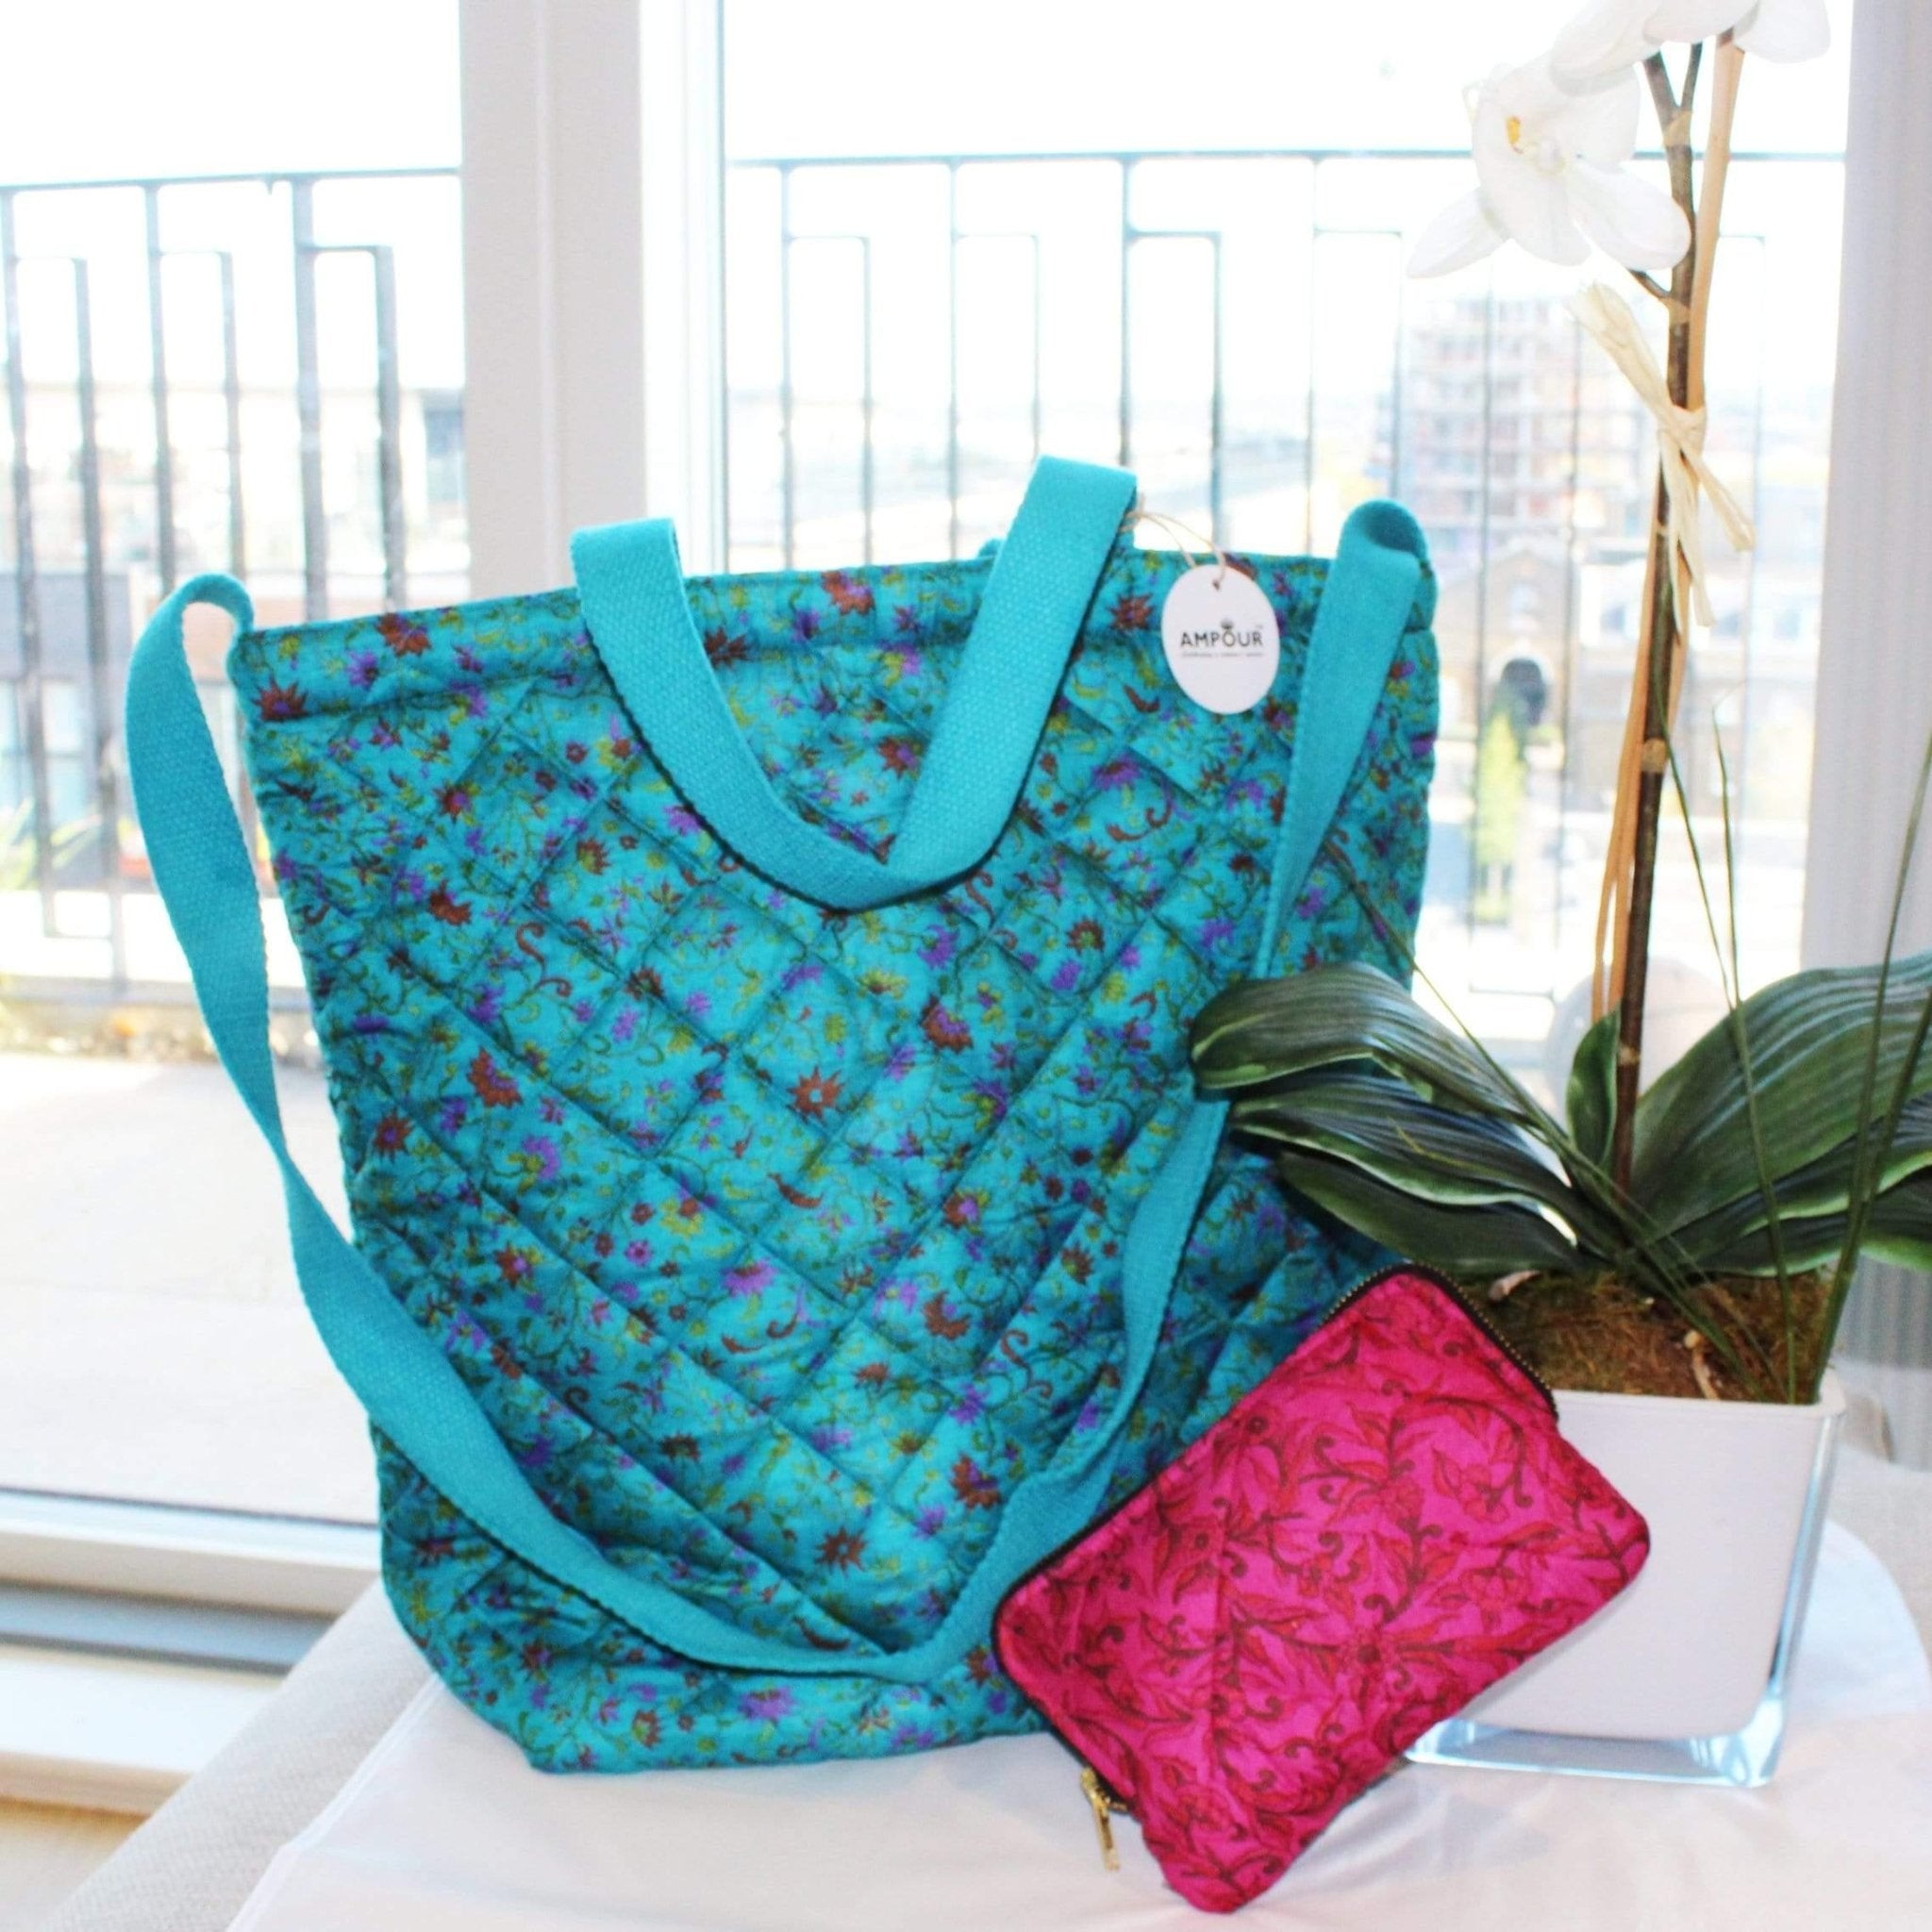 Premium Recycled Silk Make - up Bag + Recycled Silk Tote Bag (One - Off Print) - Ammpoure Wellbeing